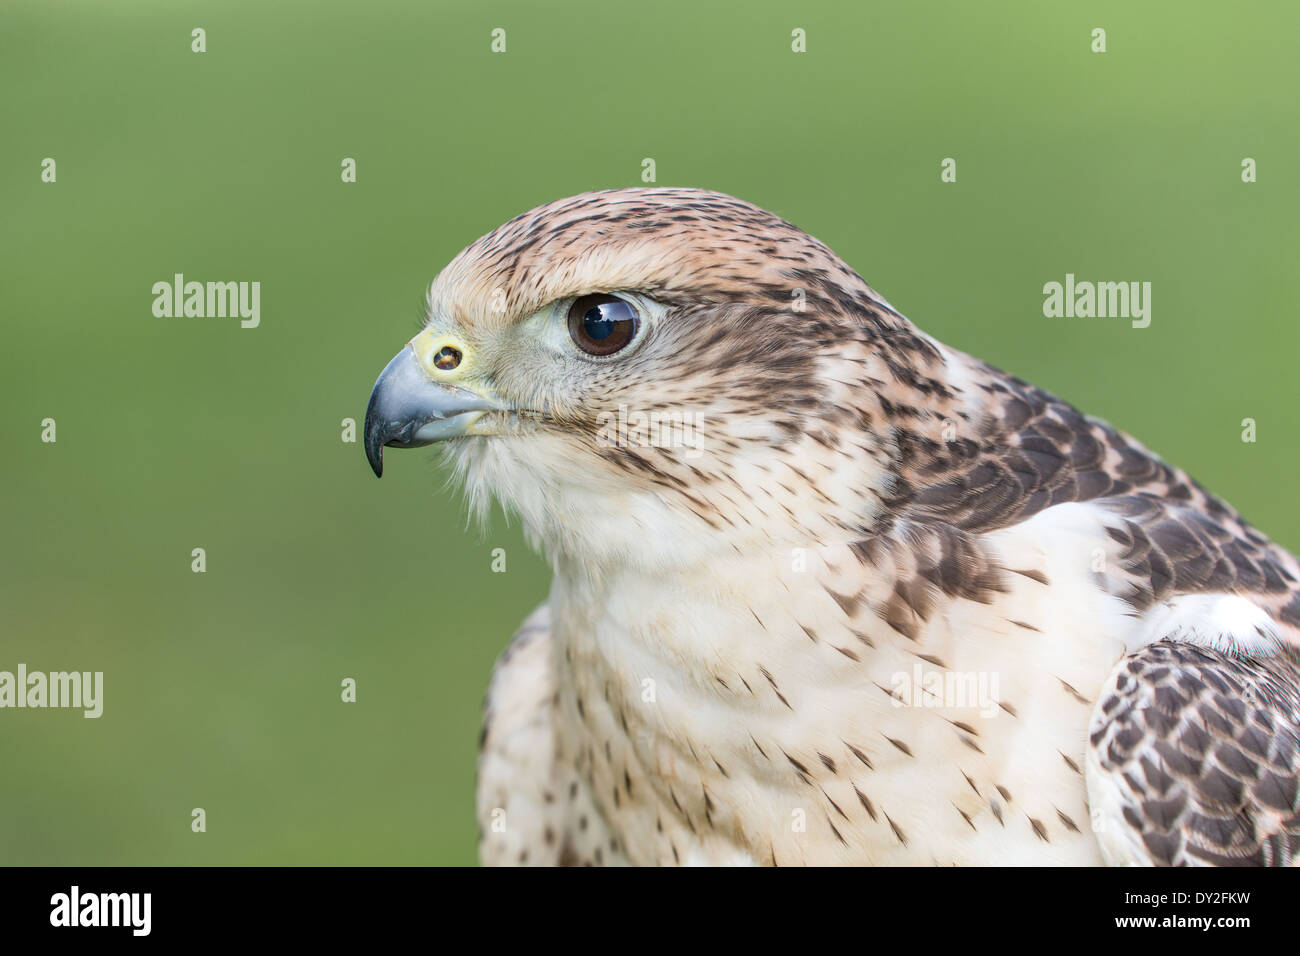 Portrait of a Red-tailed Hawk (Buteo jamaicensis) Stock Photo